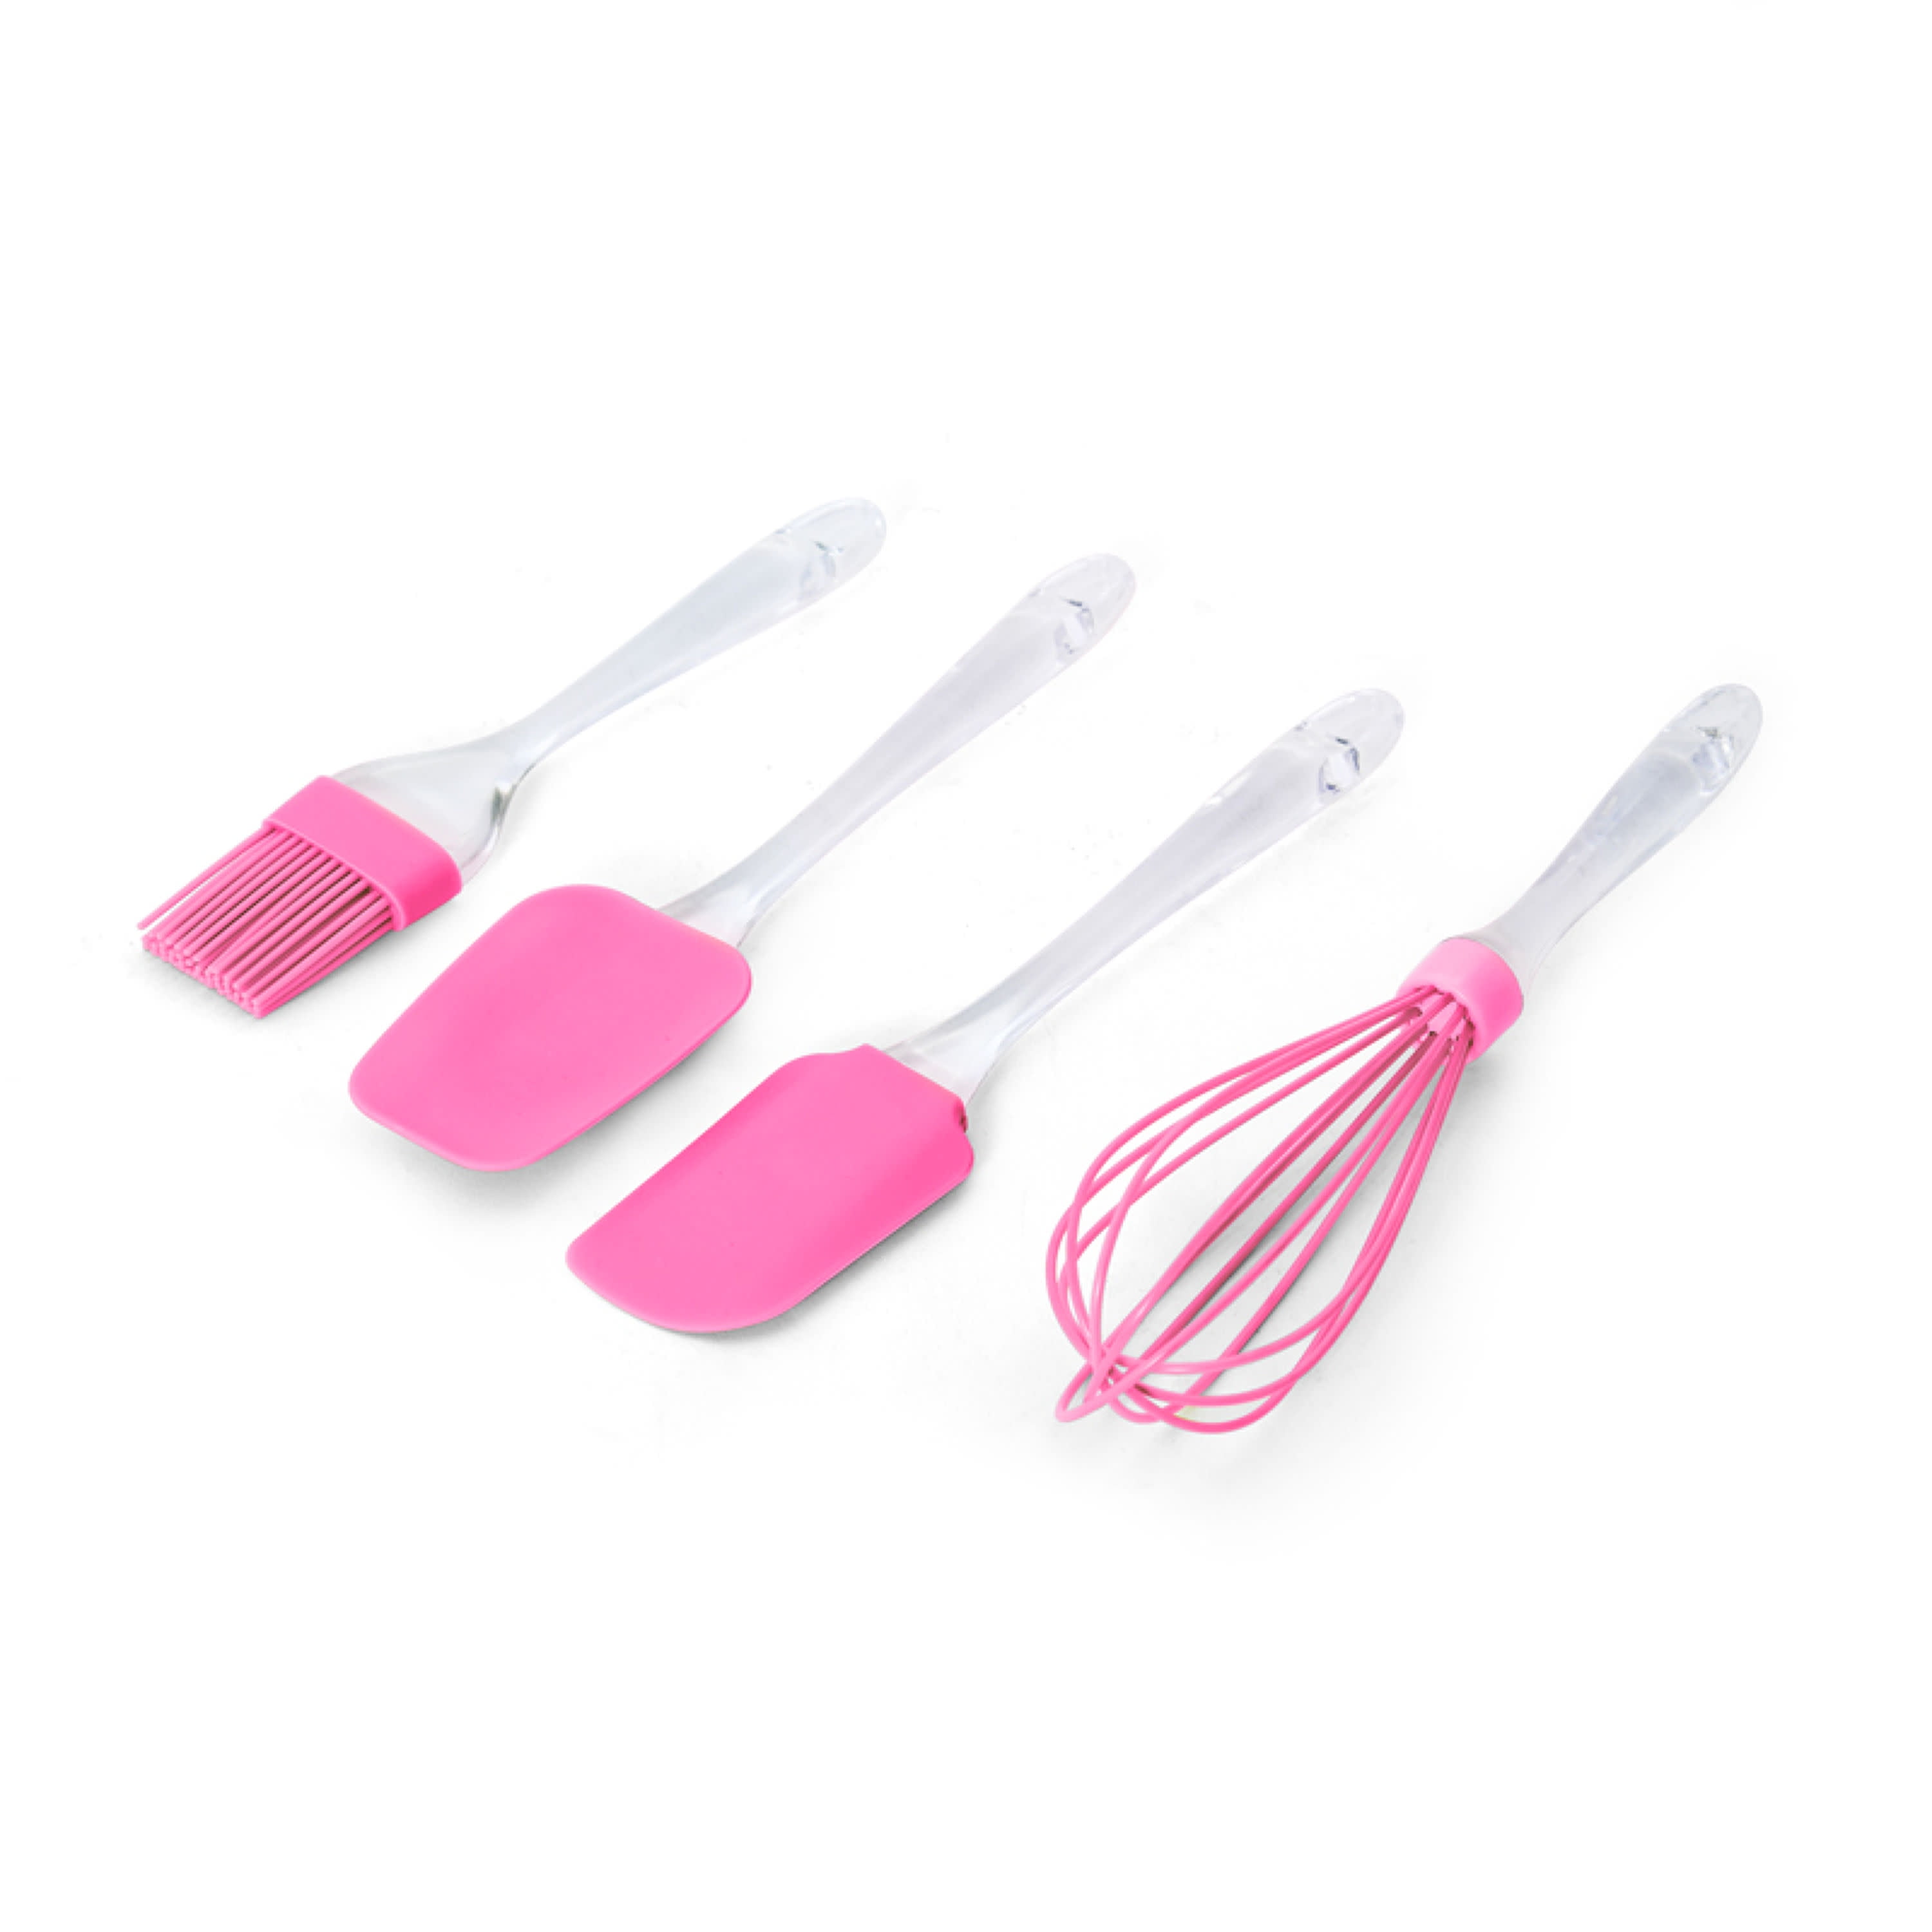 4-Piece Silicone Utensil Set in Red by Sur La Table - FabFitFun